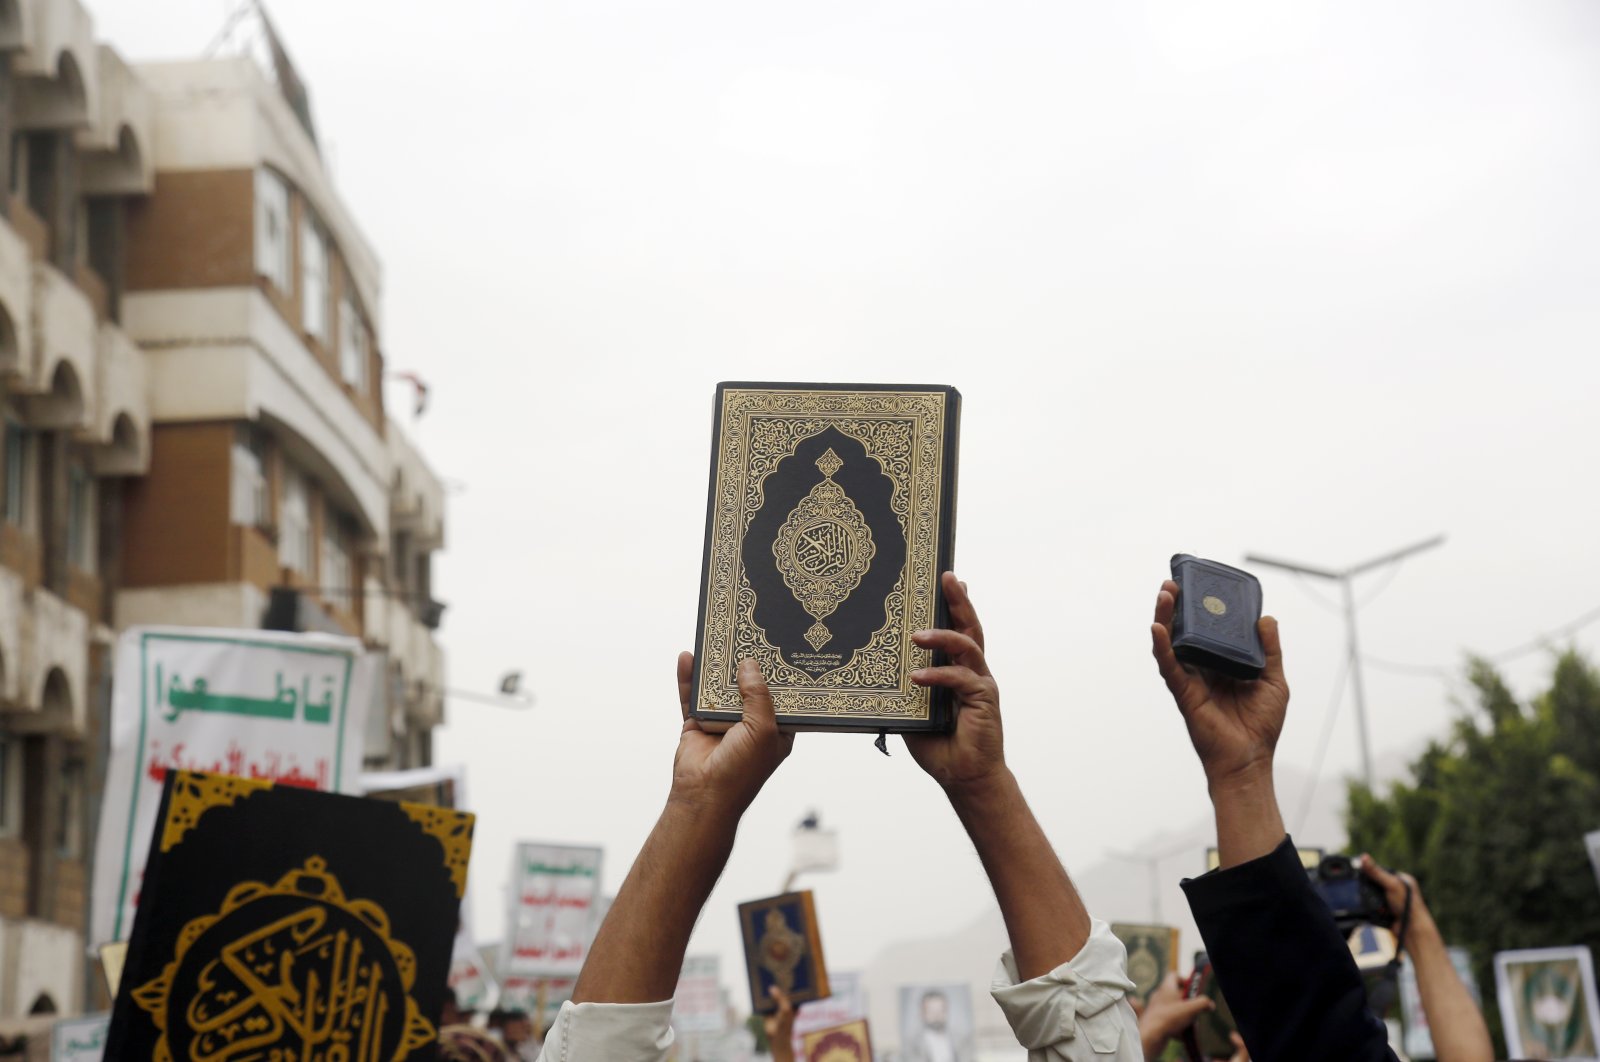 Yemenis participate in a protest denouncing the burning of Islam’s holy book, the Quran, in Sweden and Denmark, in Sanaa, Yemen, July 24, 2023.(Getty Images Photo)